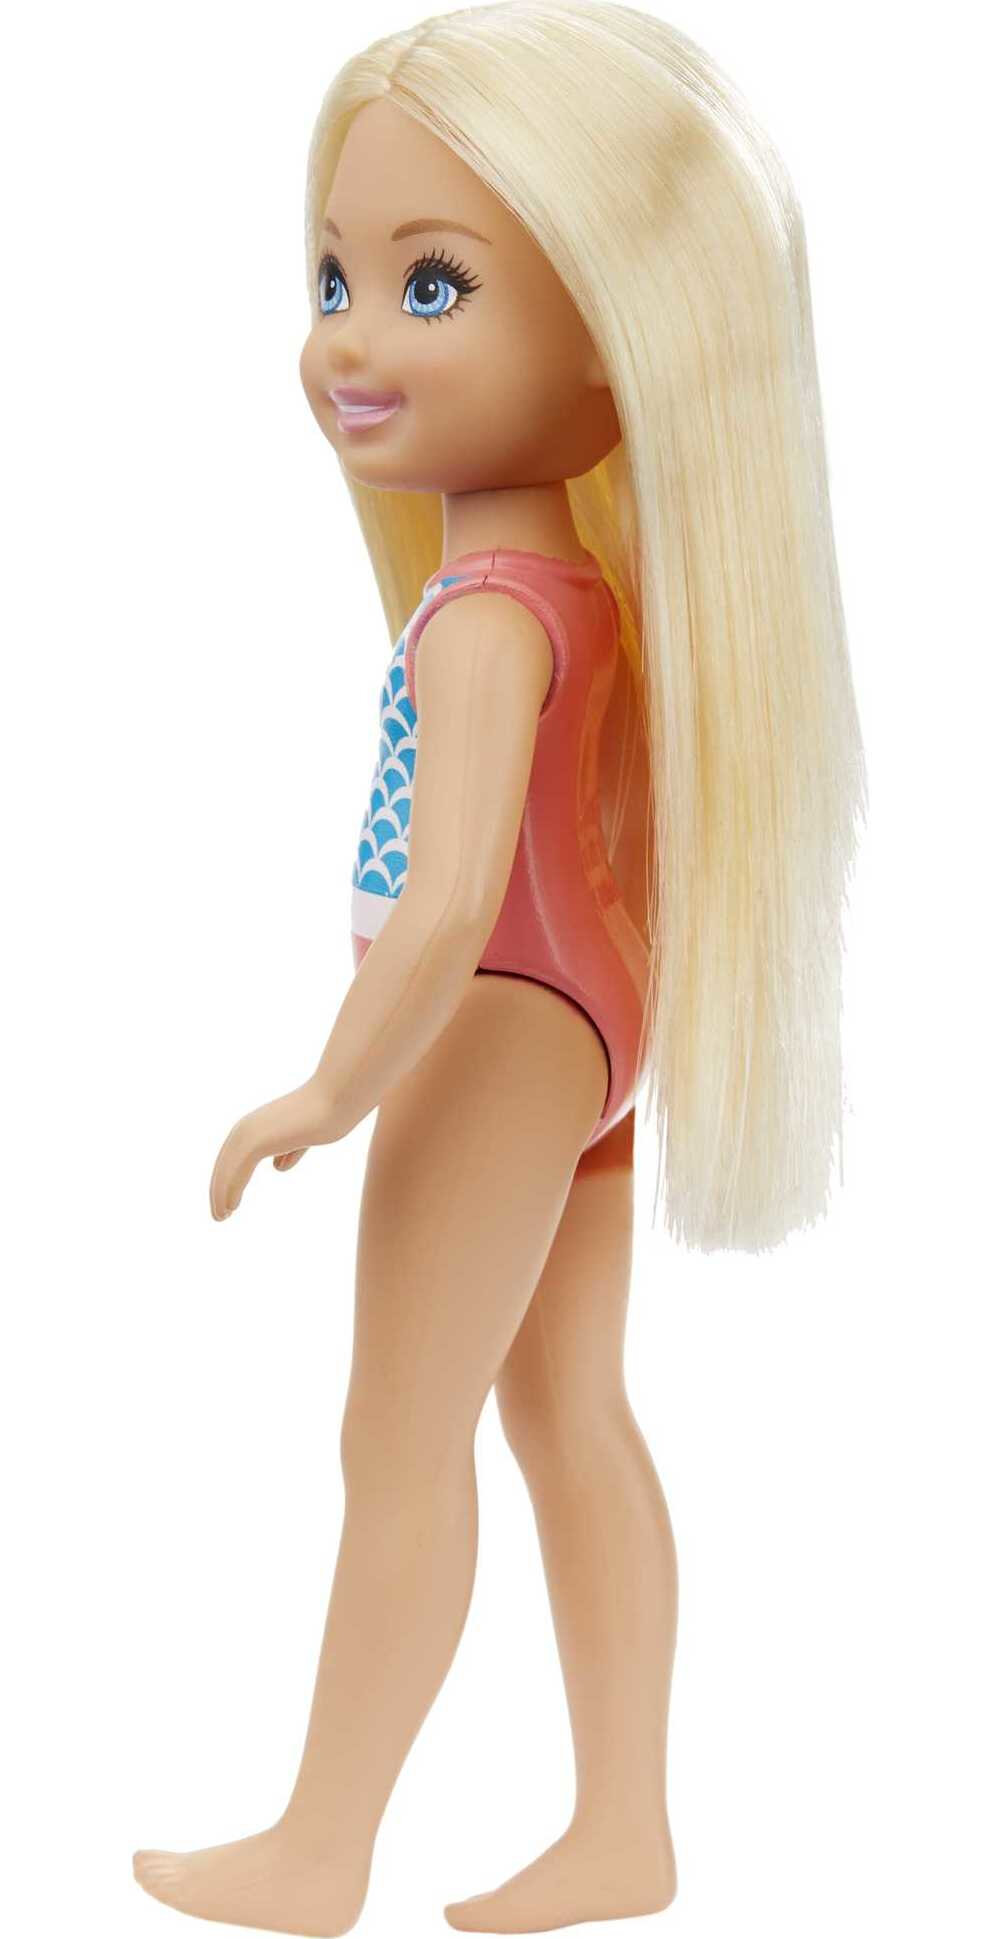 Barbie Club Chelsea Doll, Small Doll with Long Blonde Hair, Blue Eyes & Mermaid-Graphic Swimsuit - image 4 of 5